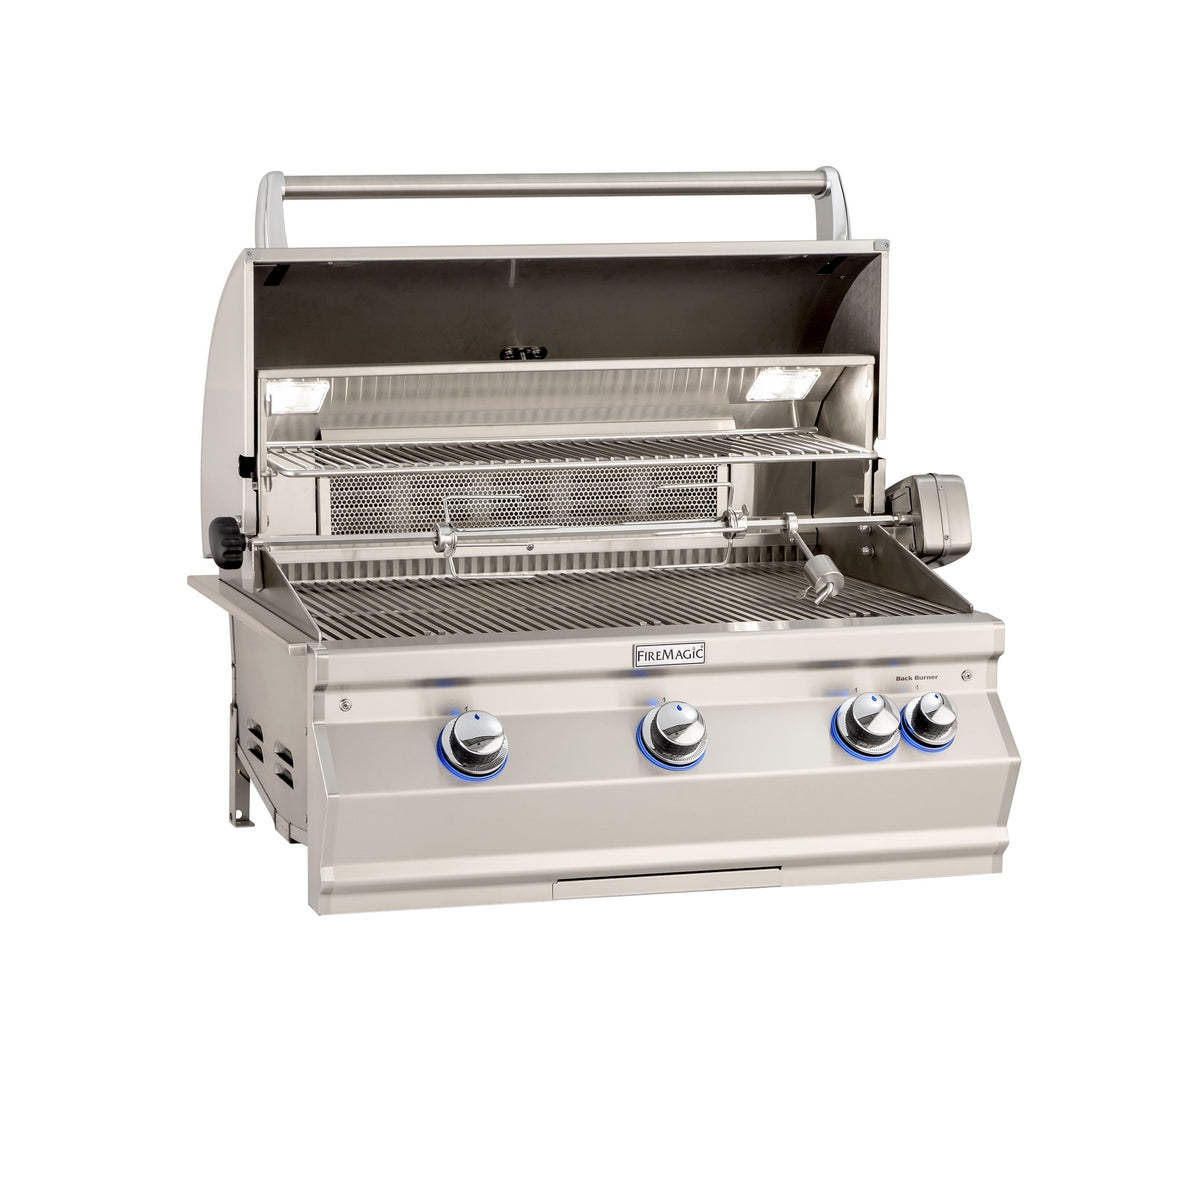 Fire Magic Aurora A540i Built-In Grill with Analog Thermometer